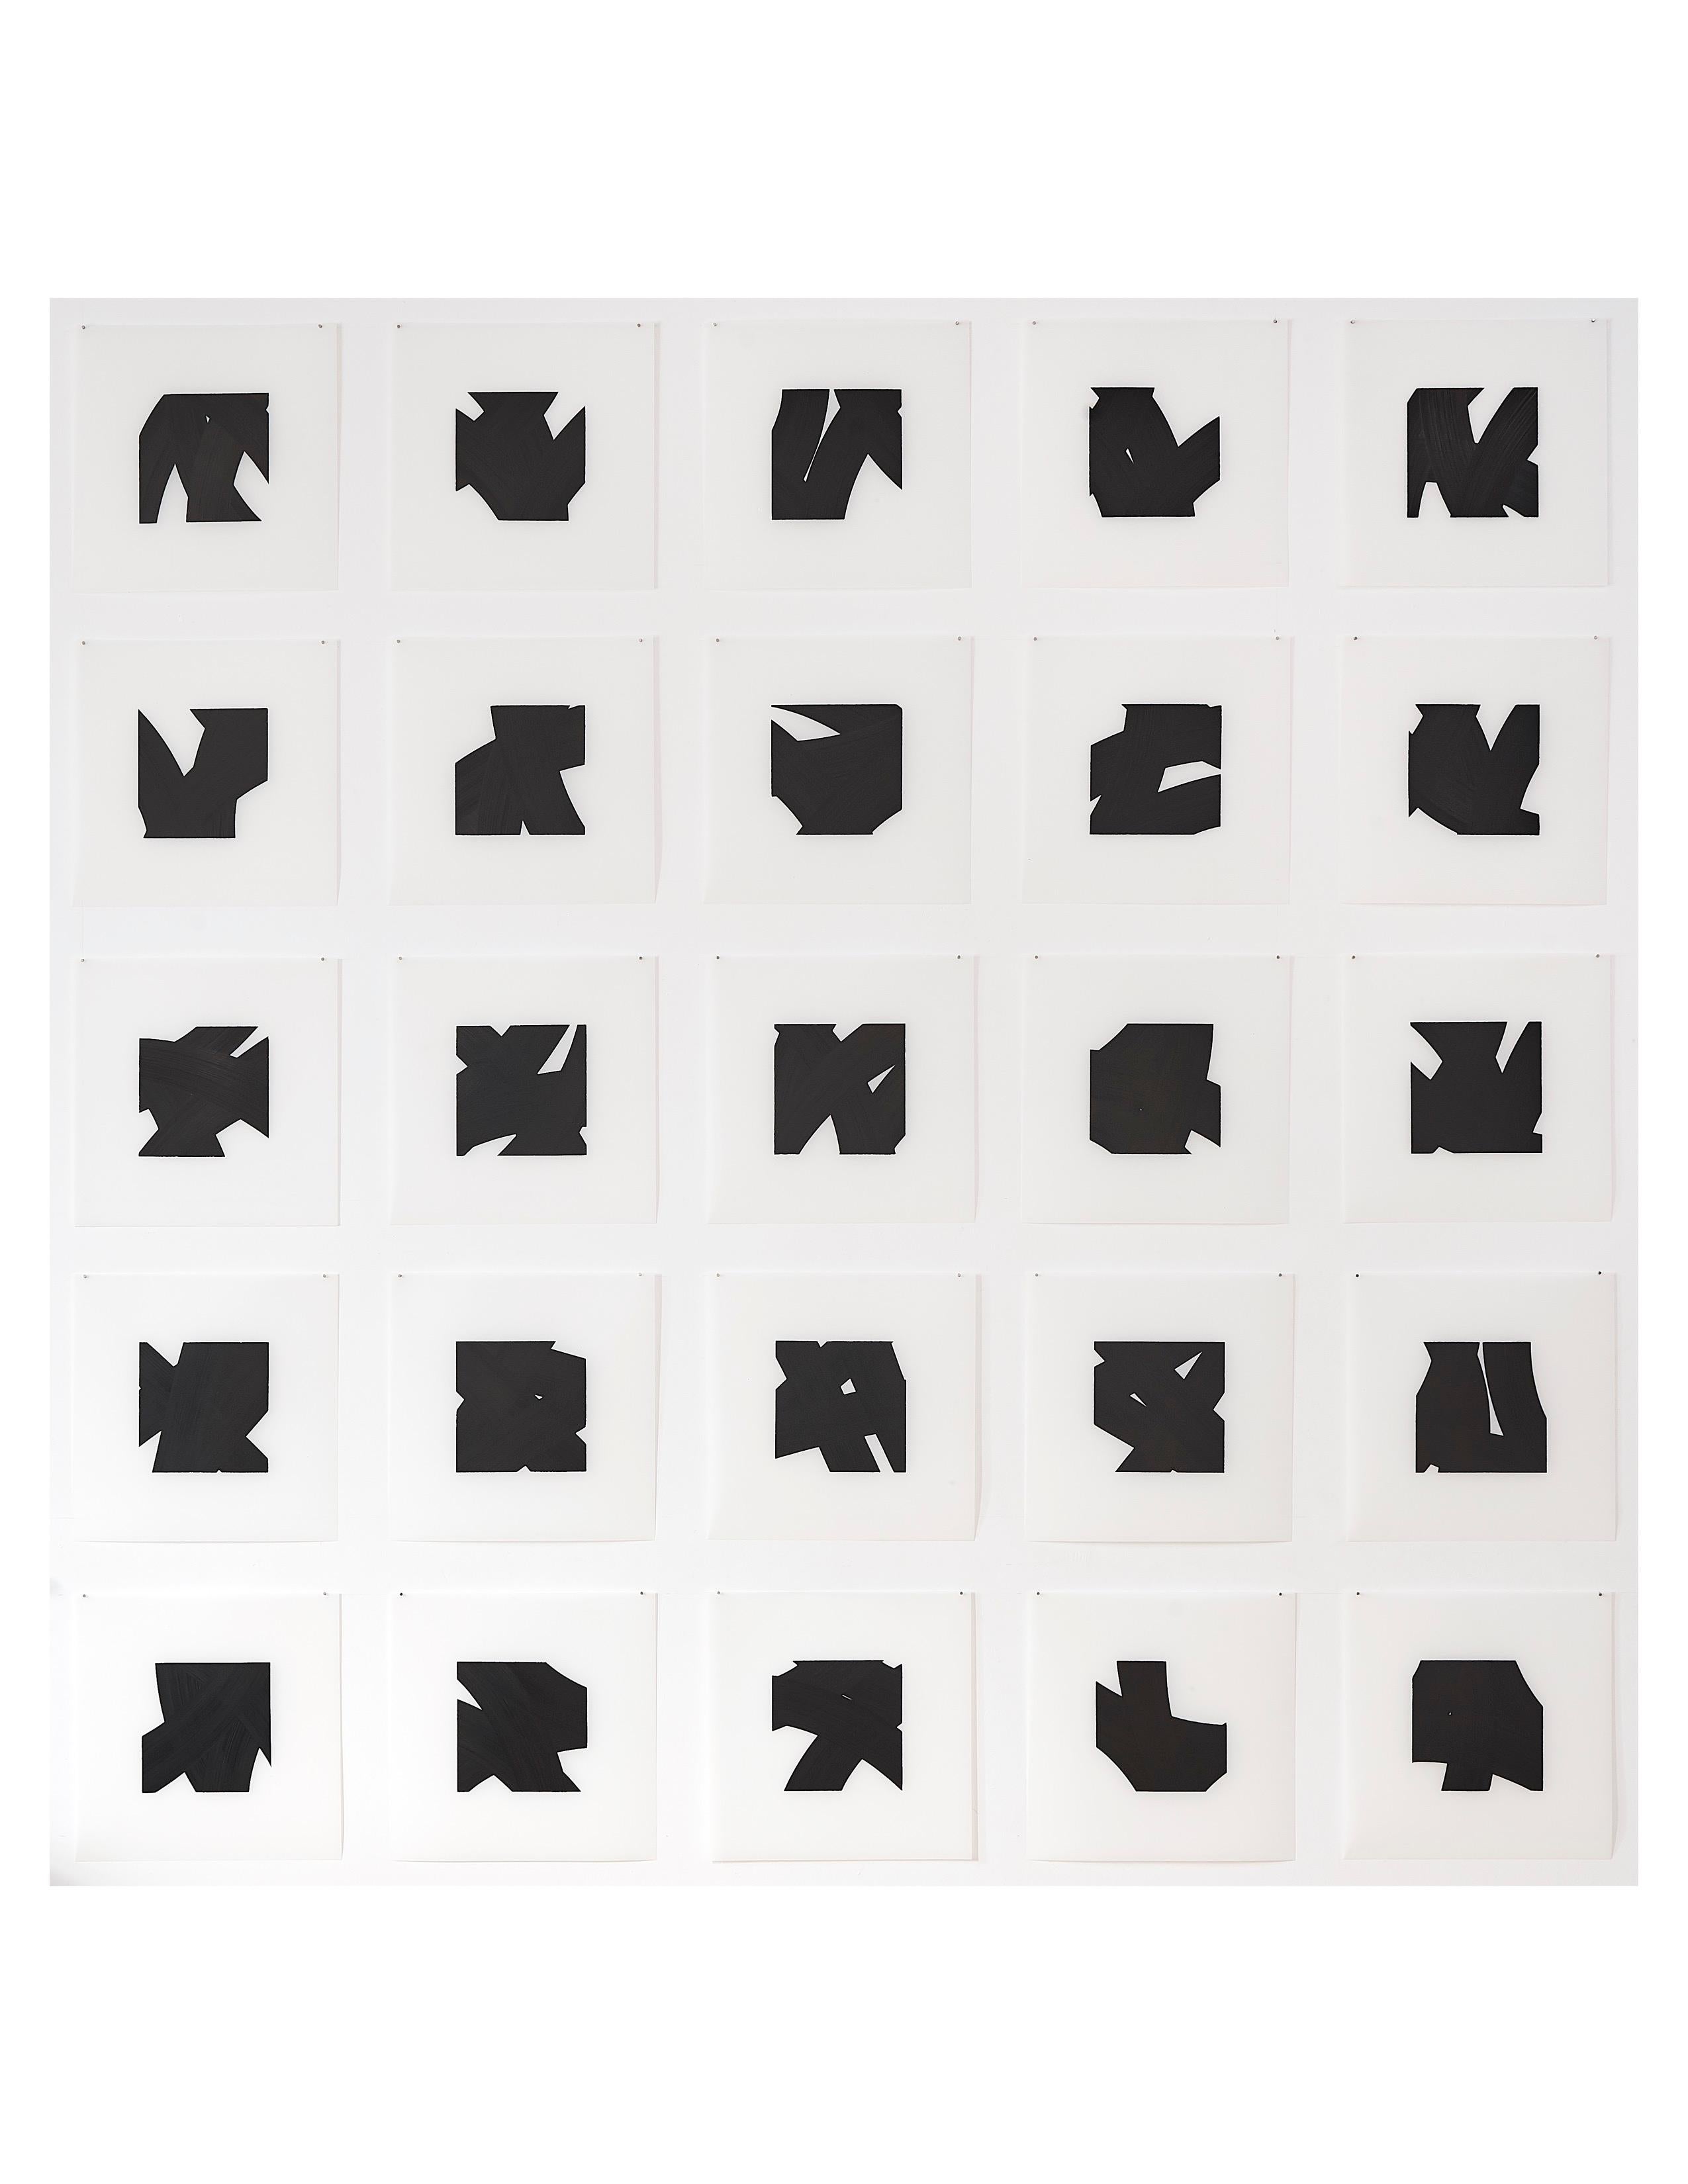 Patrick Carrara Black Ink on Mylar Drawings, Appearance Series, 2017 For Sale 1